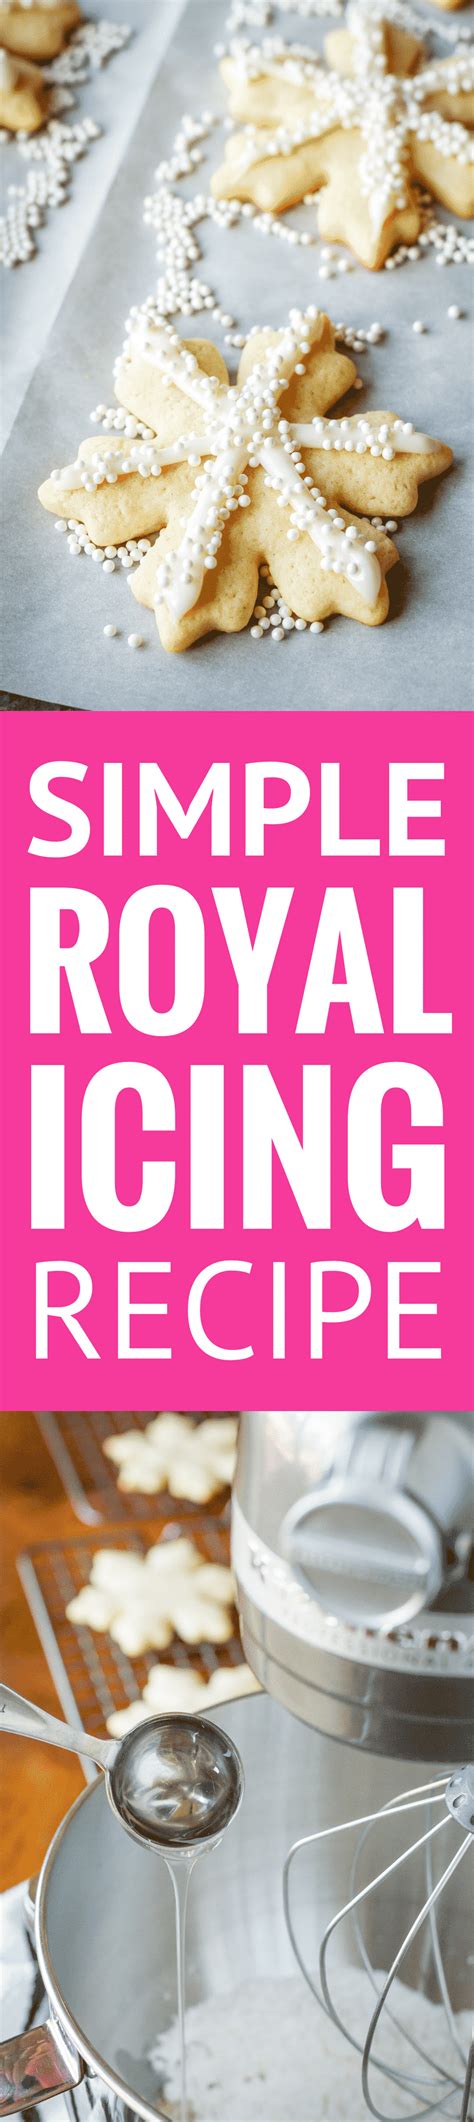 Royal icing is used for cake and cookie decorations. Simple Royal Icing Recipe -- this royal icing is SO ridiculously easy to make! No egg whites, no ...